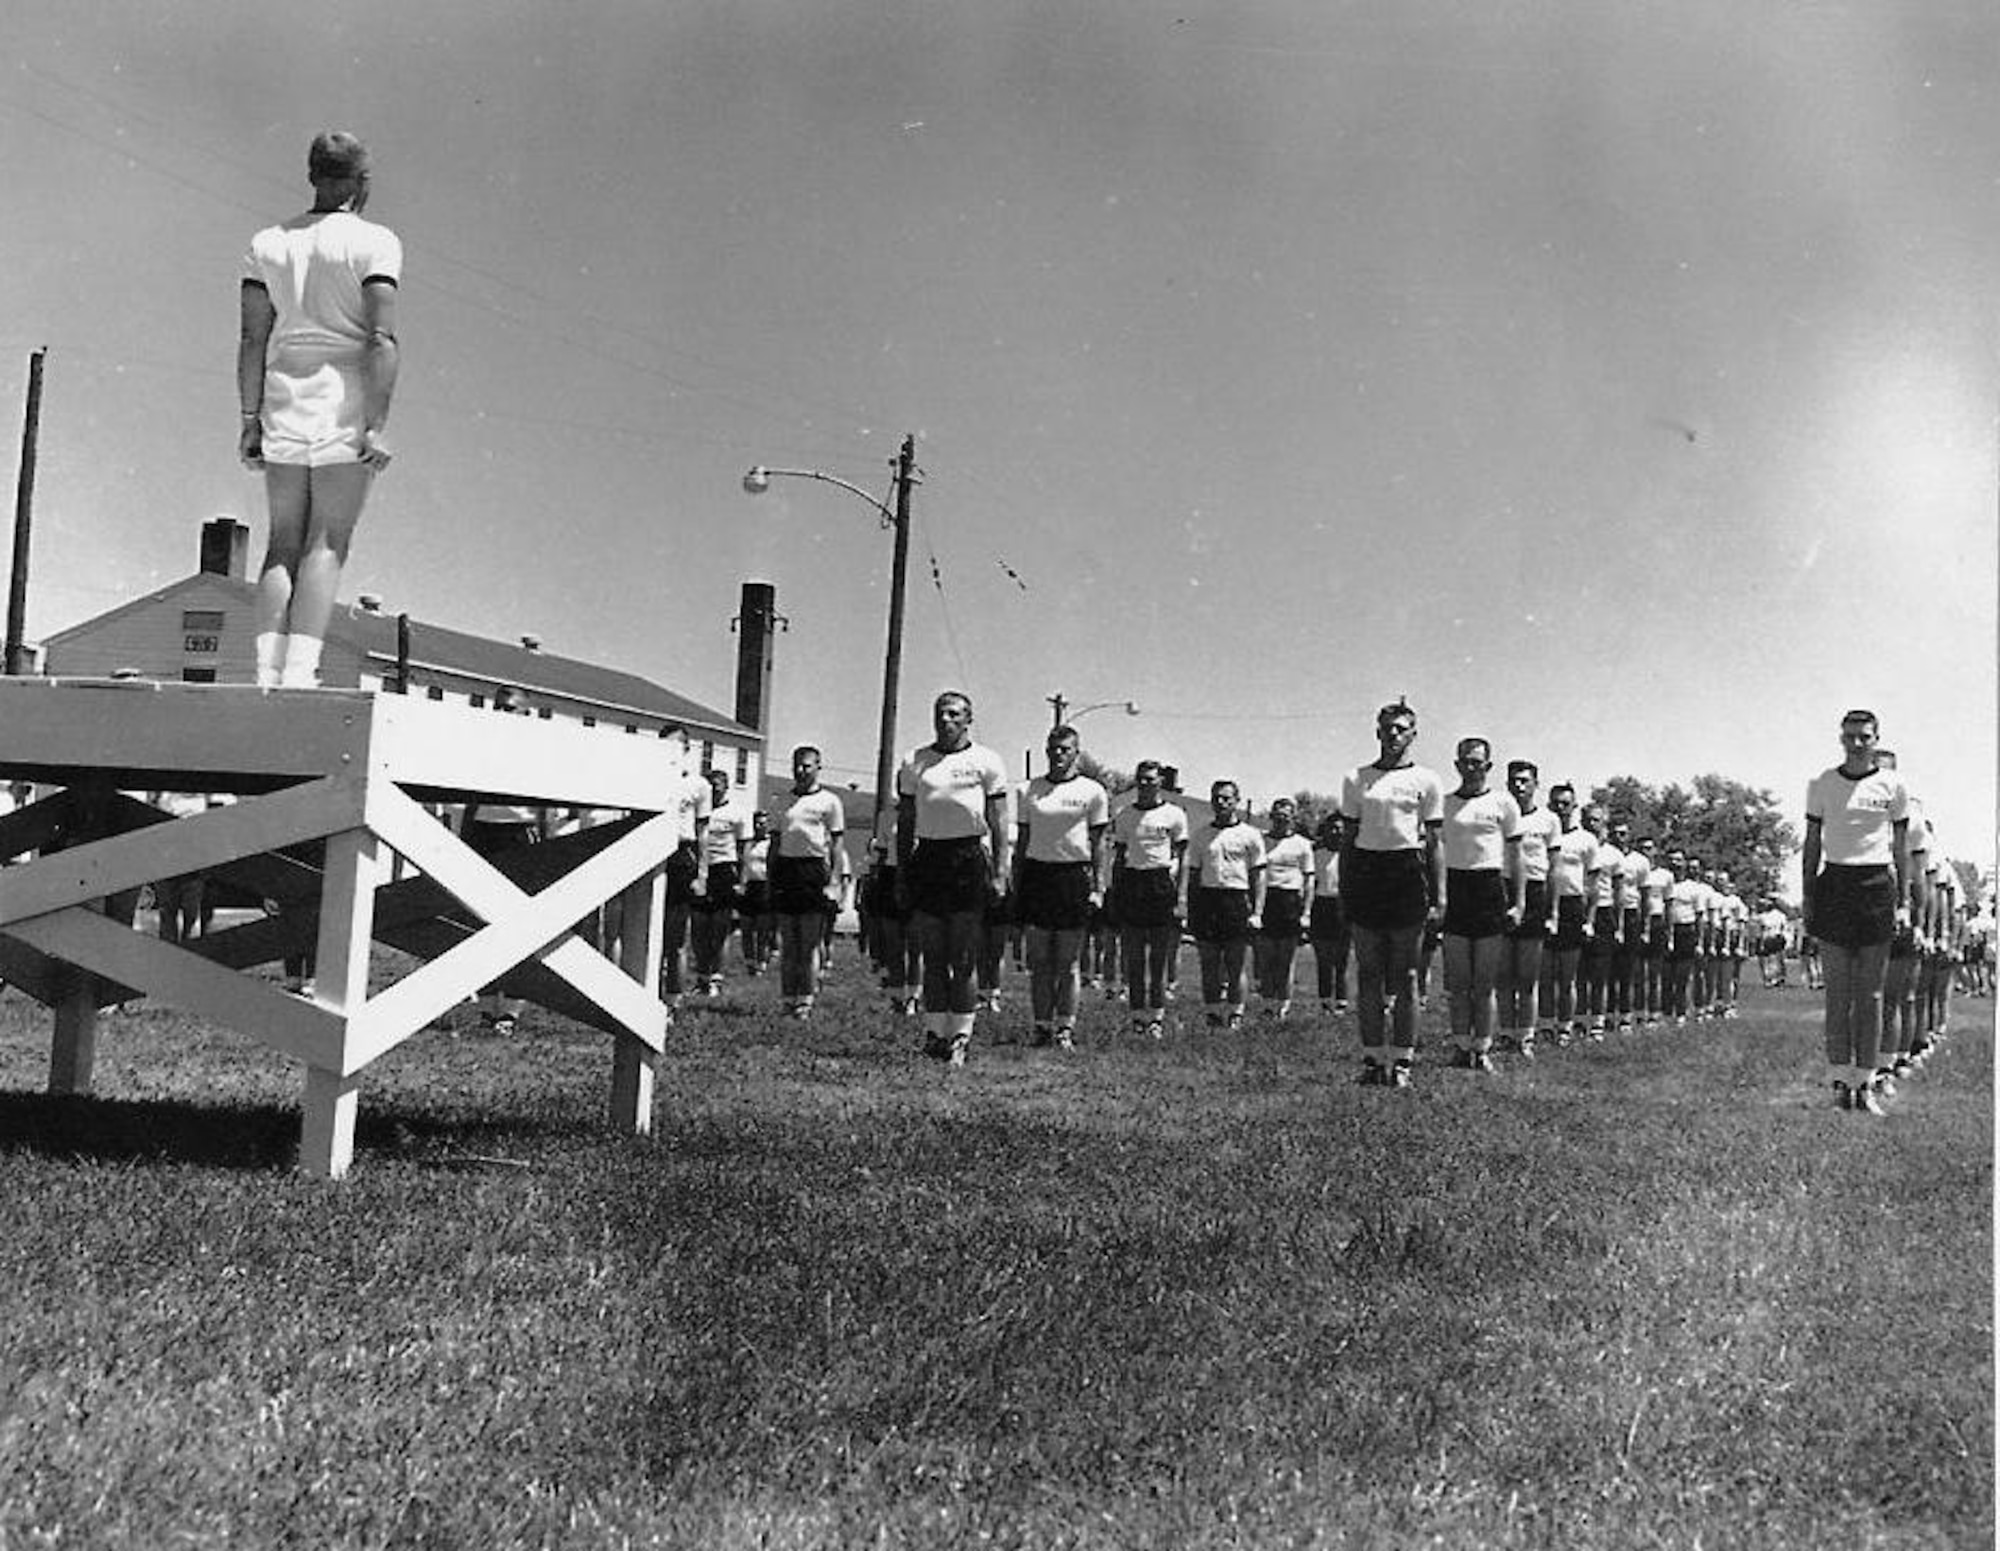 LOWRY AIR FORCE BASE, Colo. -- Basic cadets from the first Air Force Academy class line up for physical training here, the temporary location for the academy while permanent facilities were being constructed in Colorado Springs.  (U.S. Air Force photo)